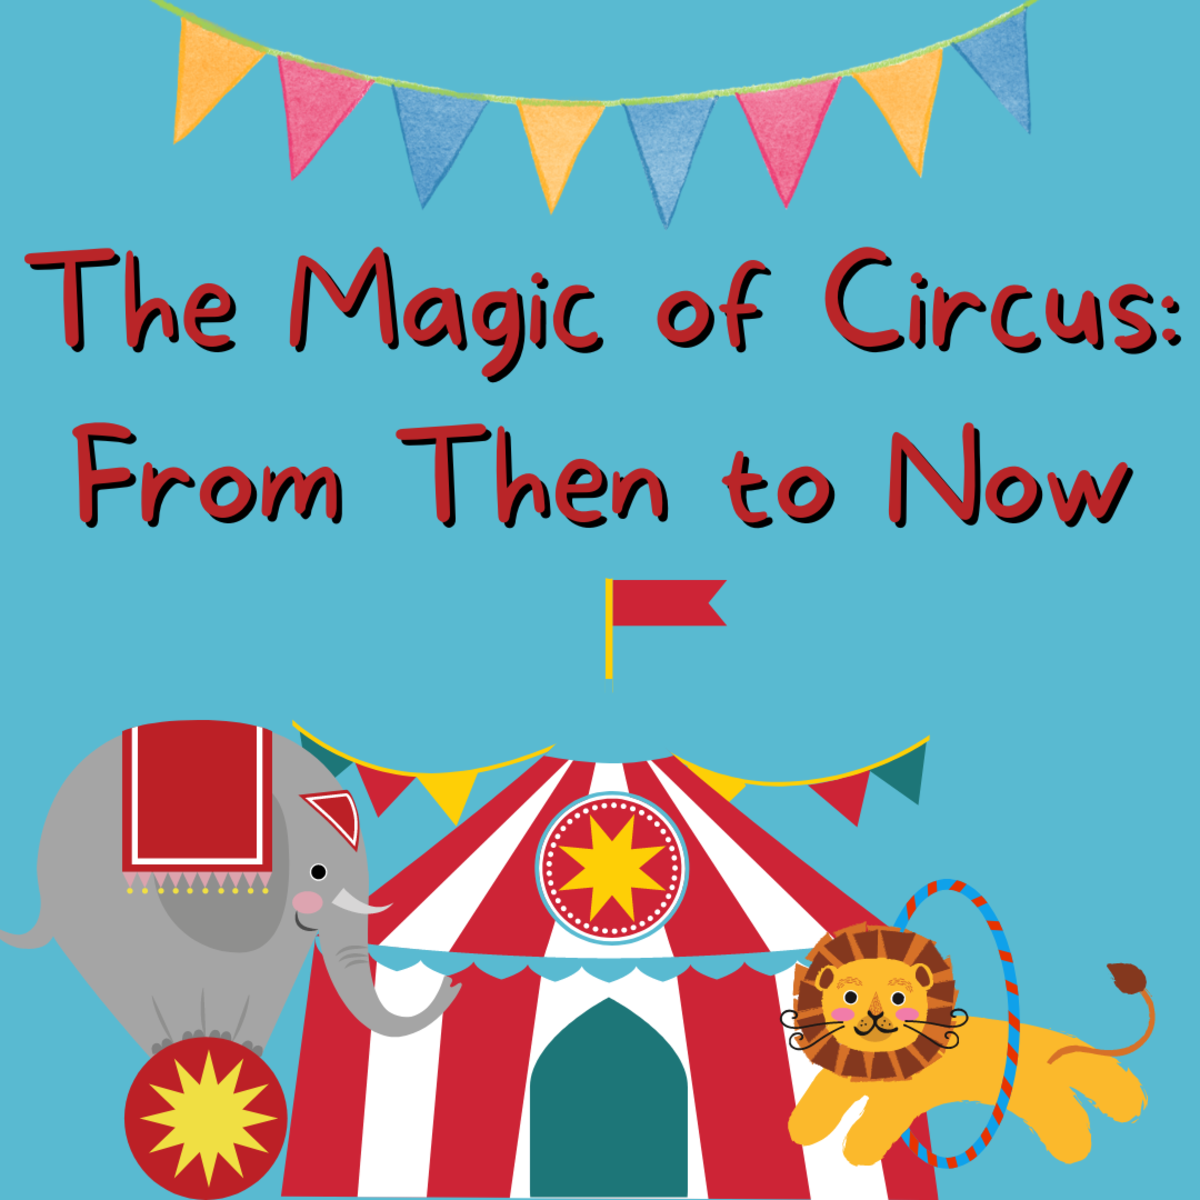 The Magic of Circus: From Then to Now